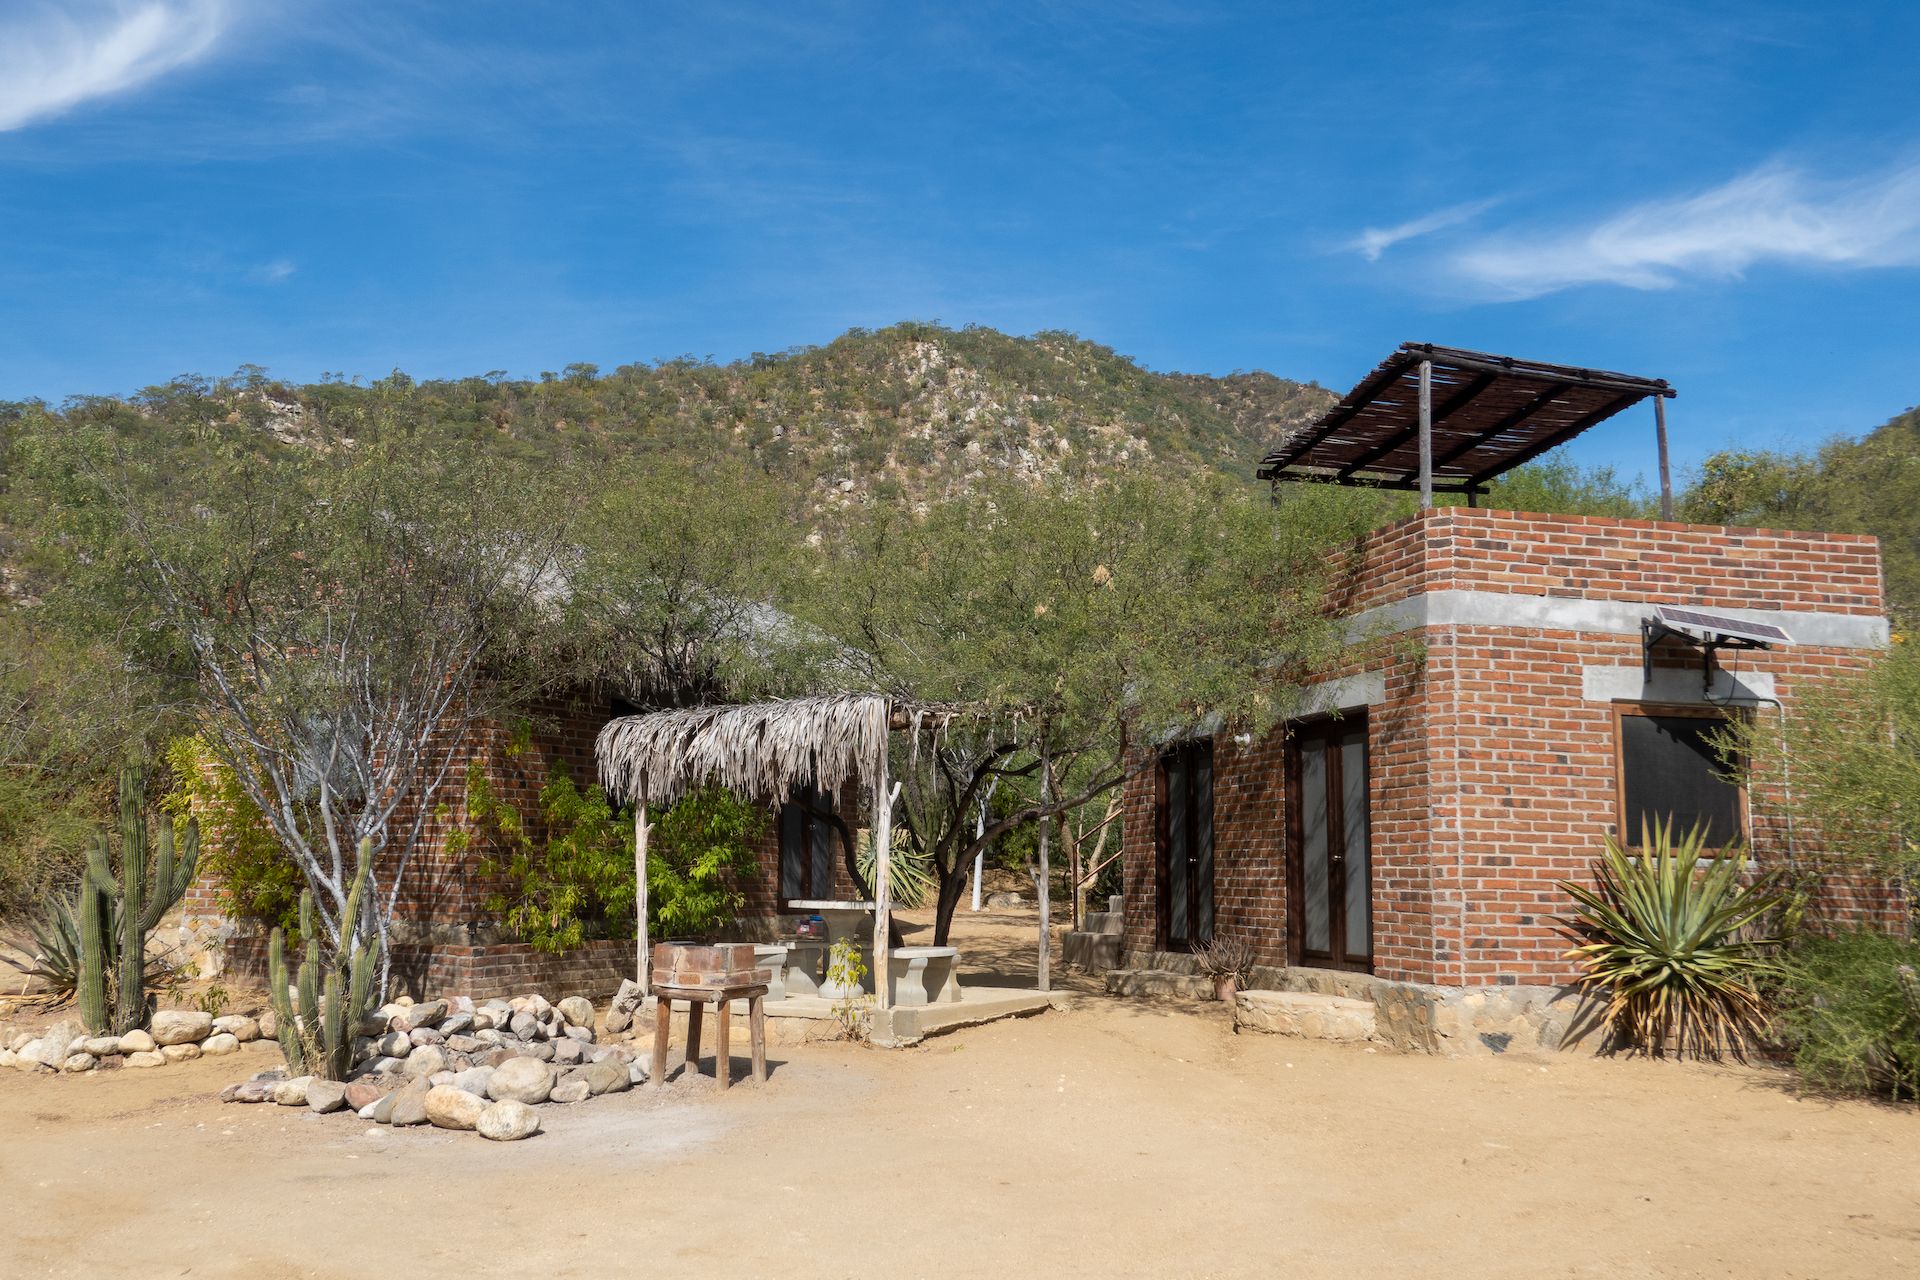 Our little casita (left) with its detached kitchen (right) and outdoor patio (center)